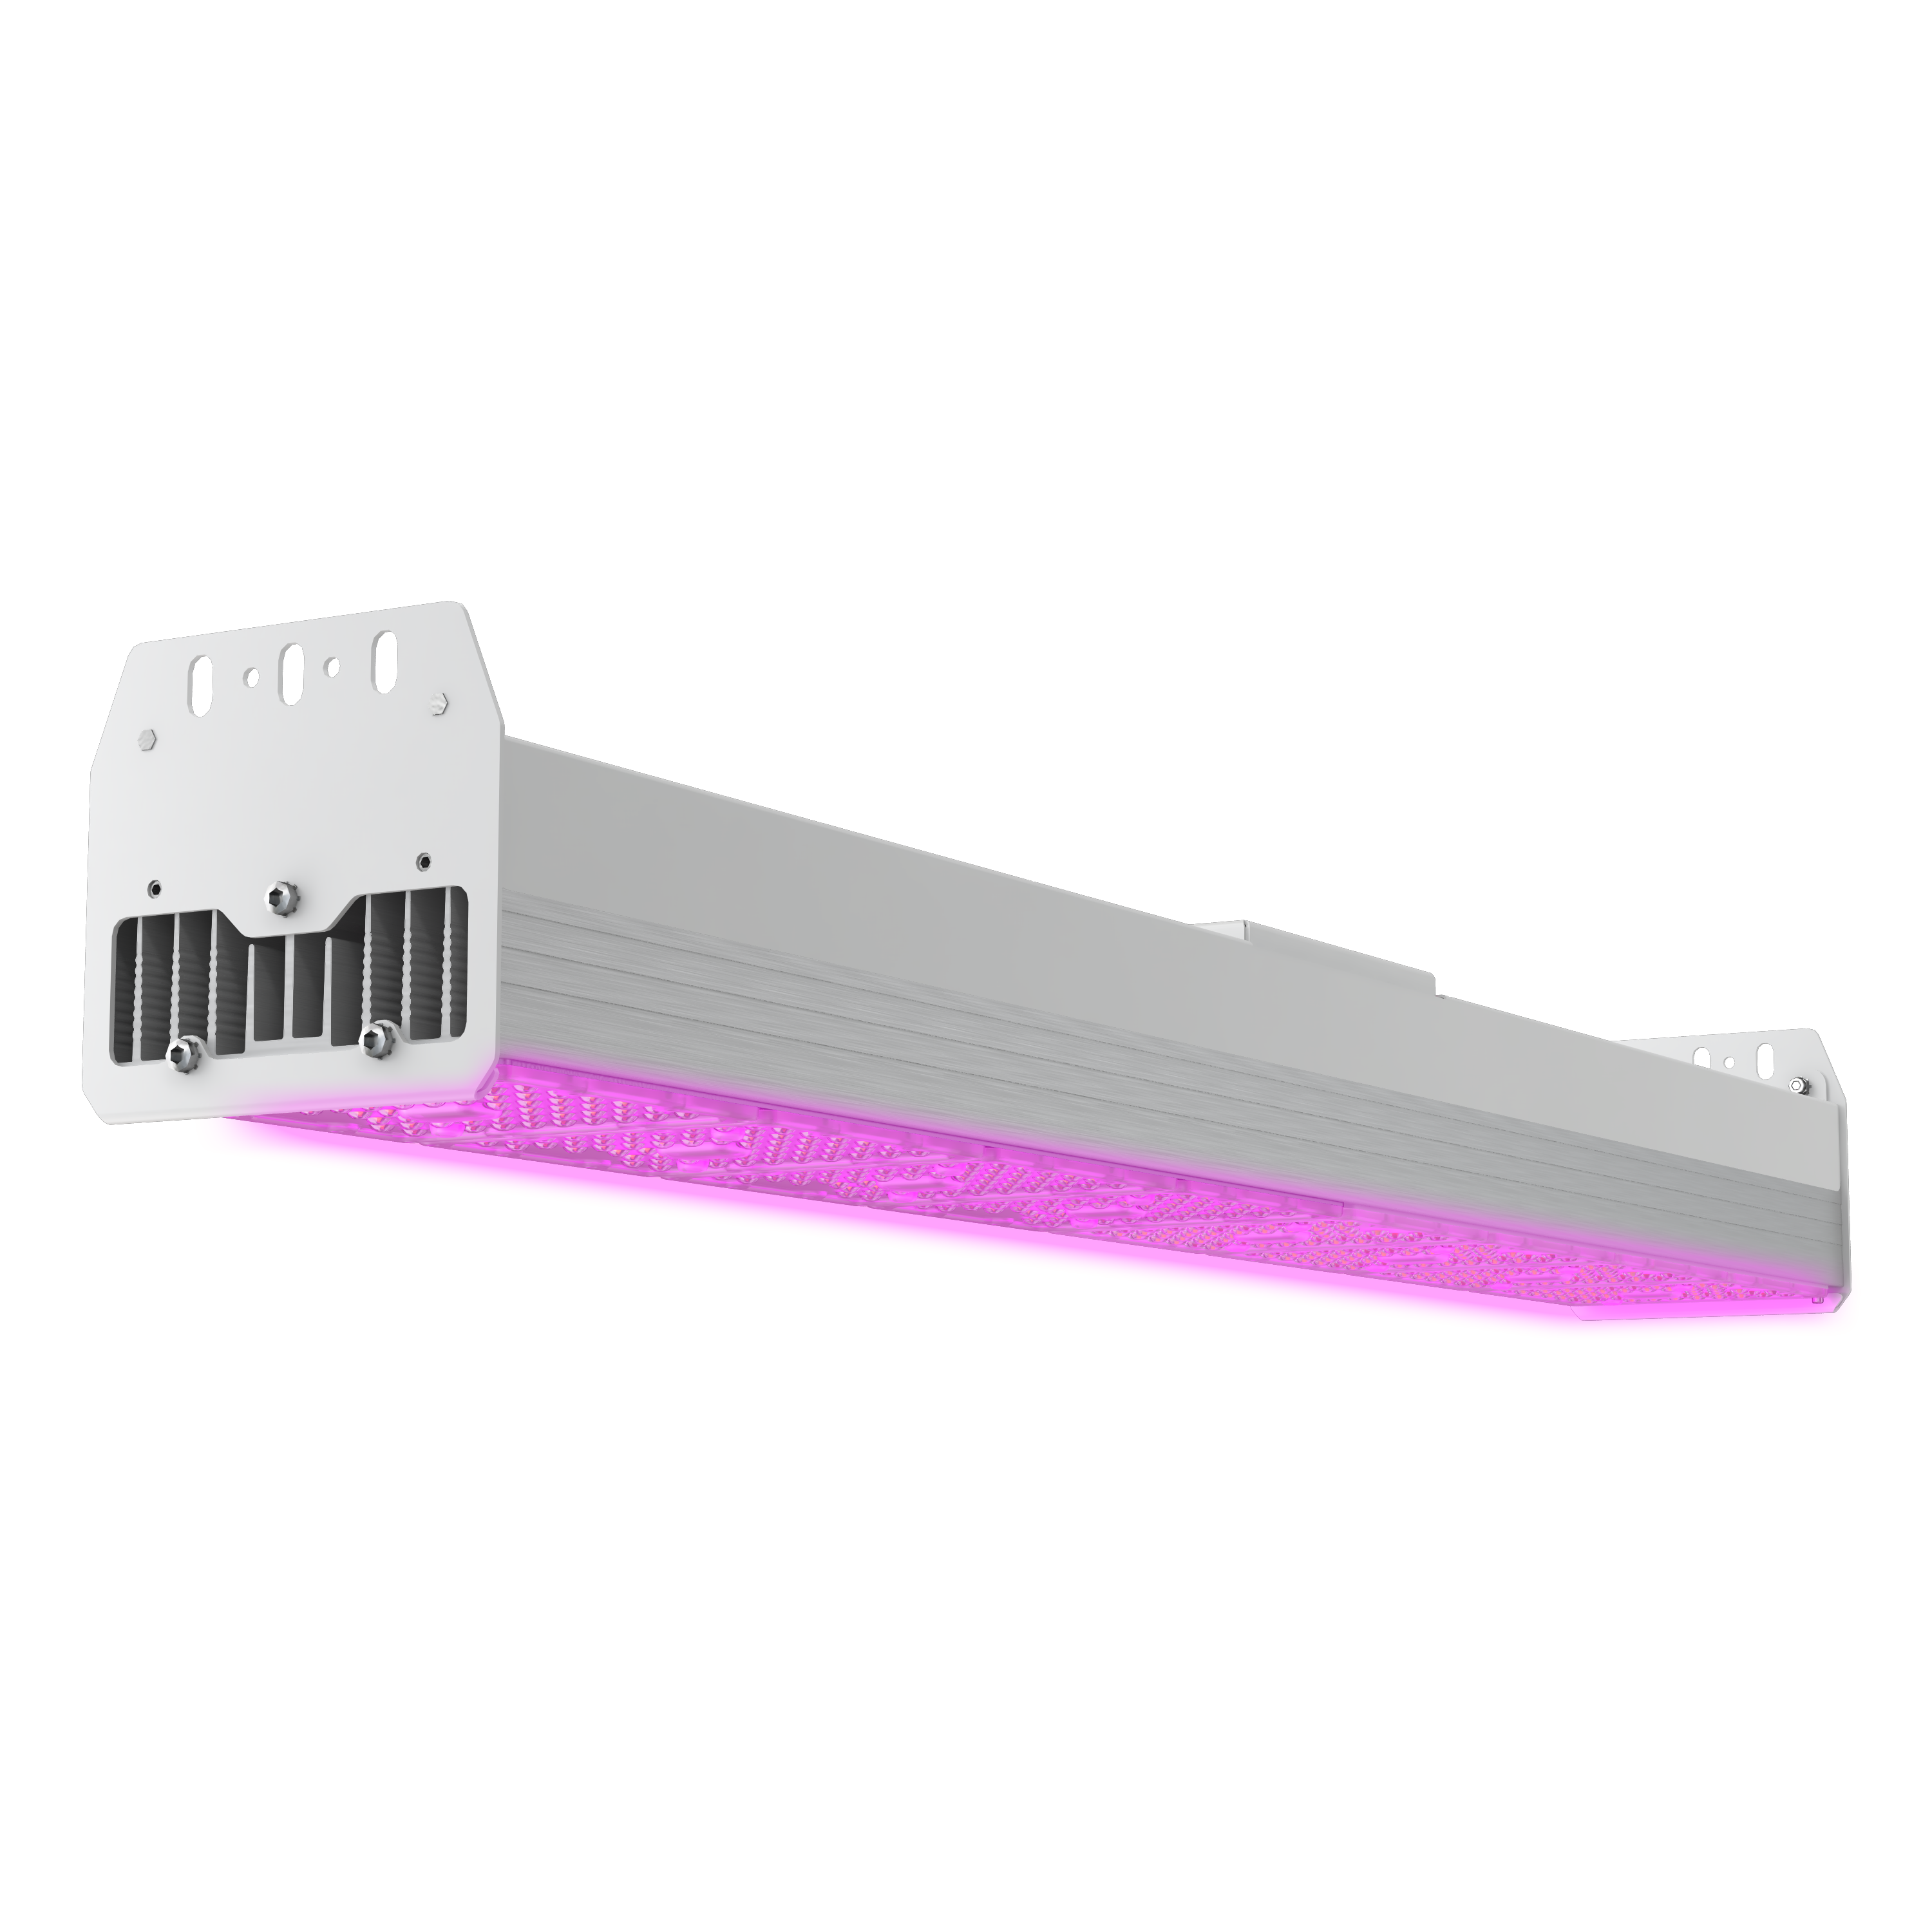 The Hyperion Pro - Grow Lights by Midstream Lighting